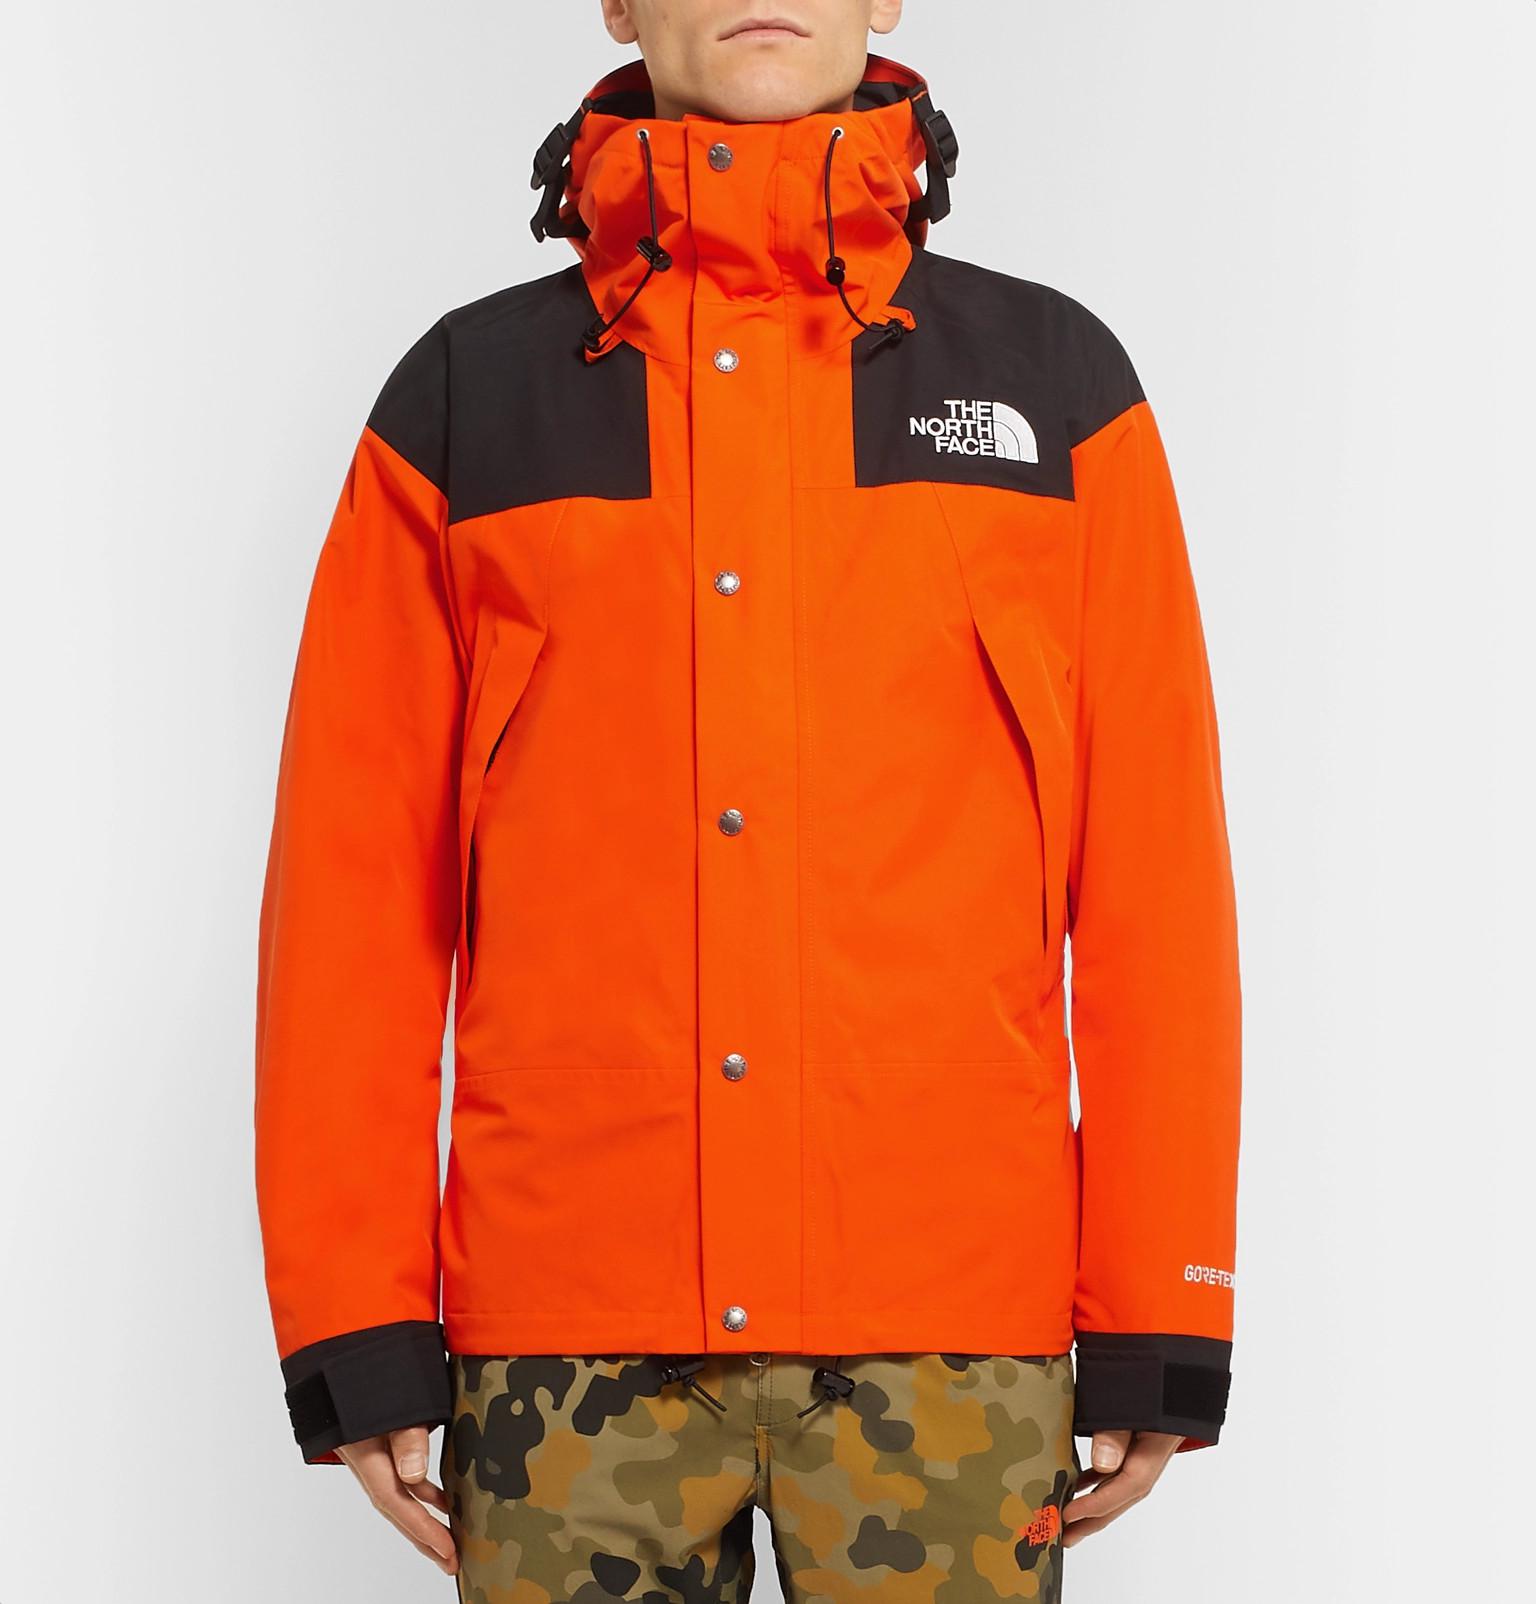 The North Face 1990 Fleece-lined Gore-tex Hooded Jacket in Orange for